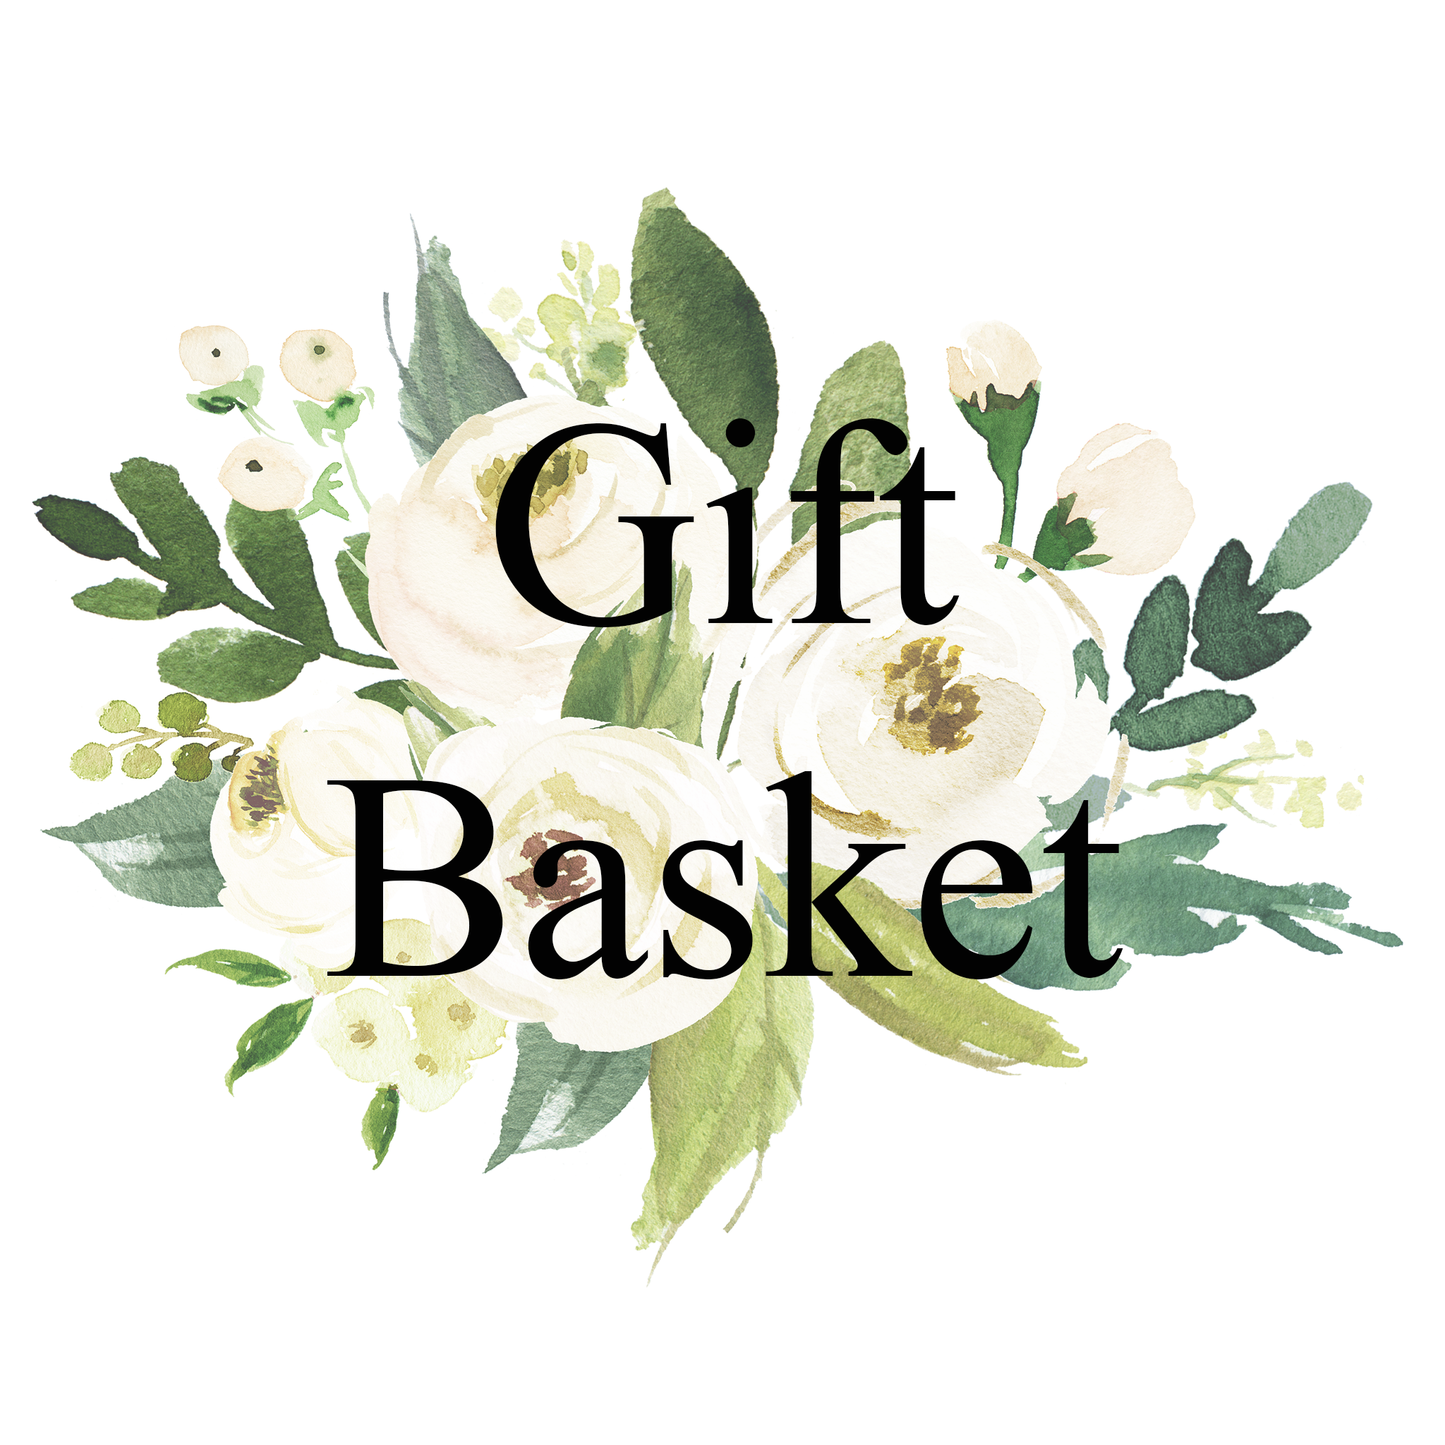 Build Your Own Gift Basket